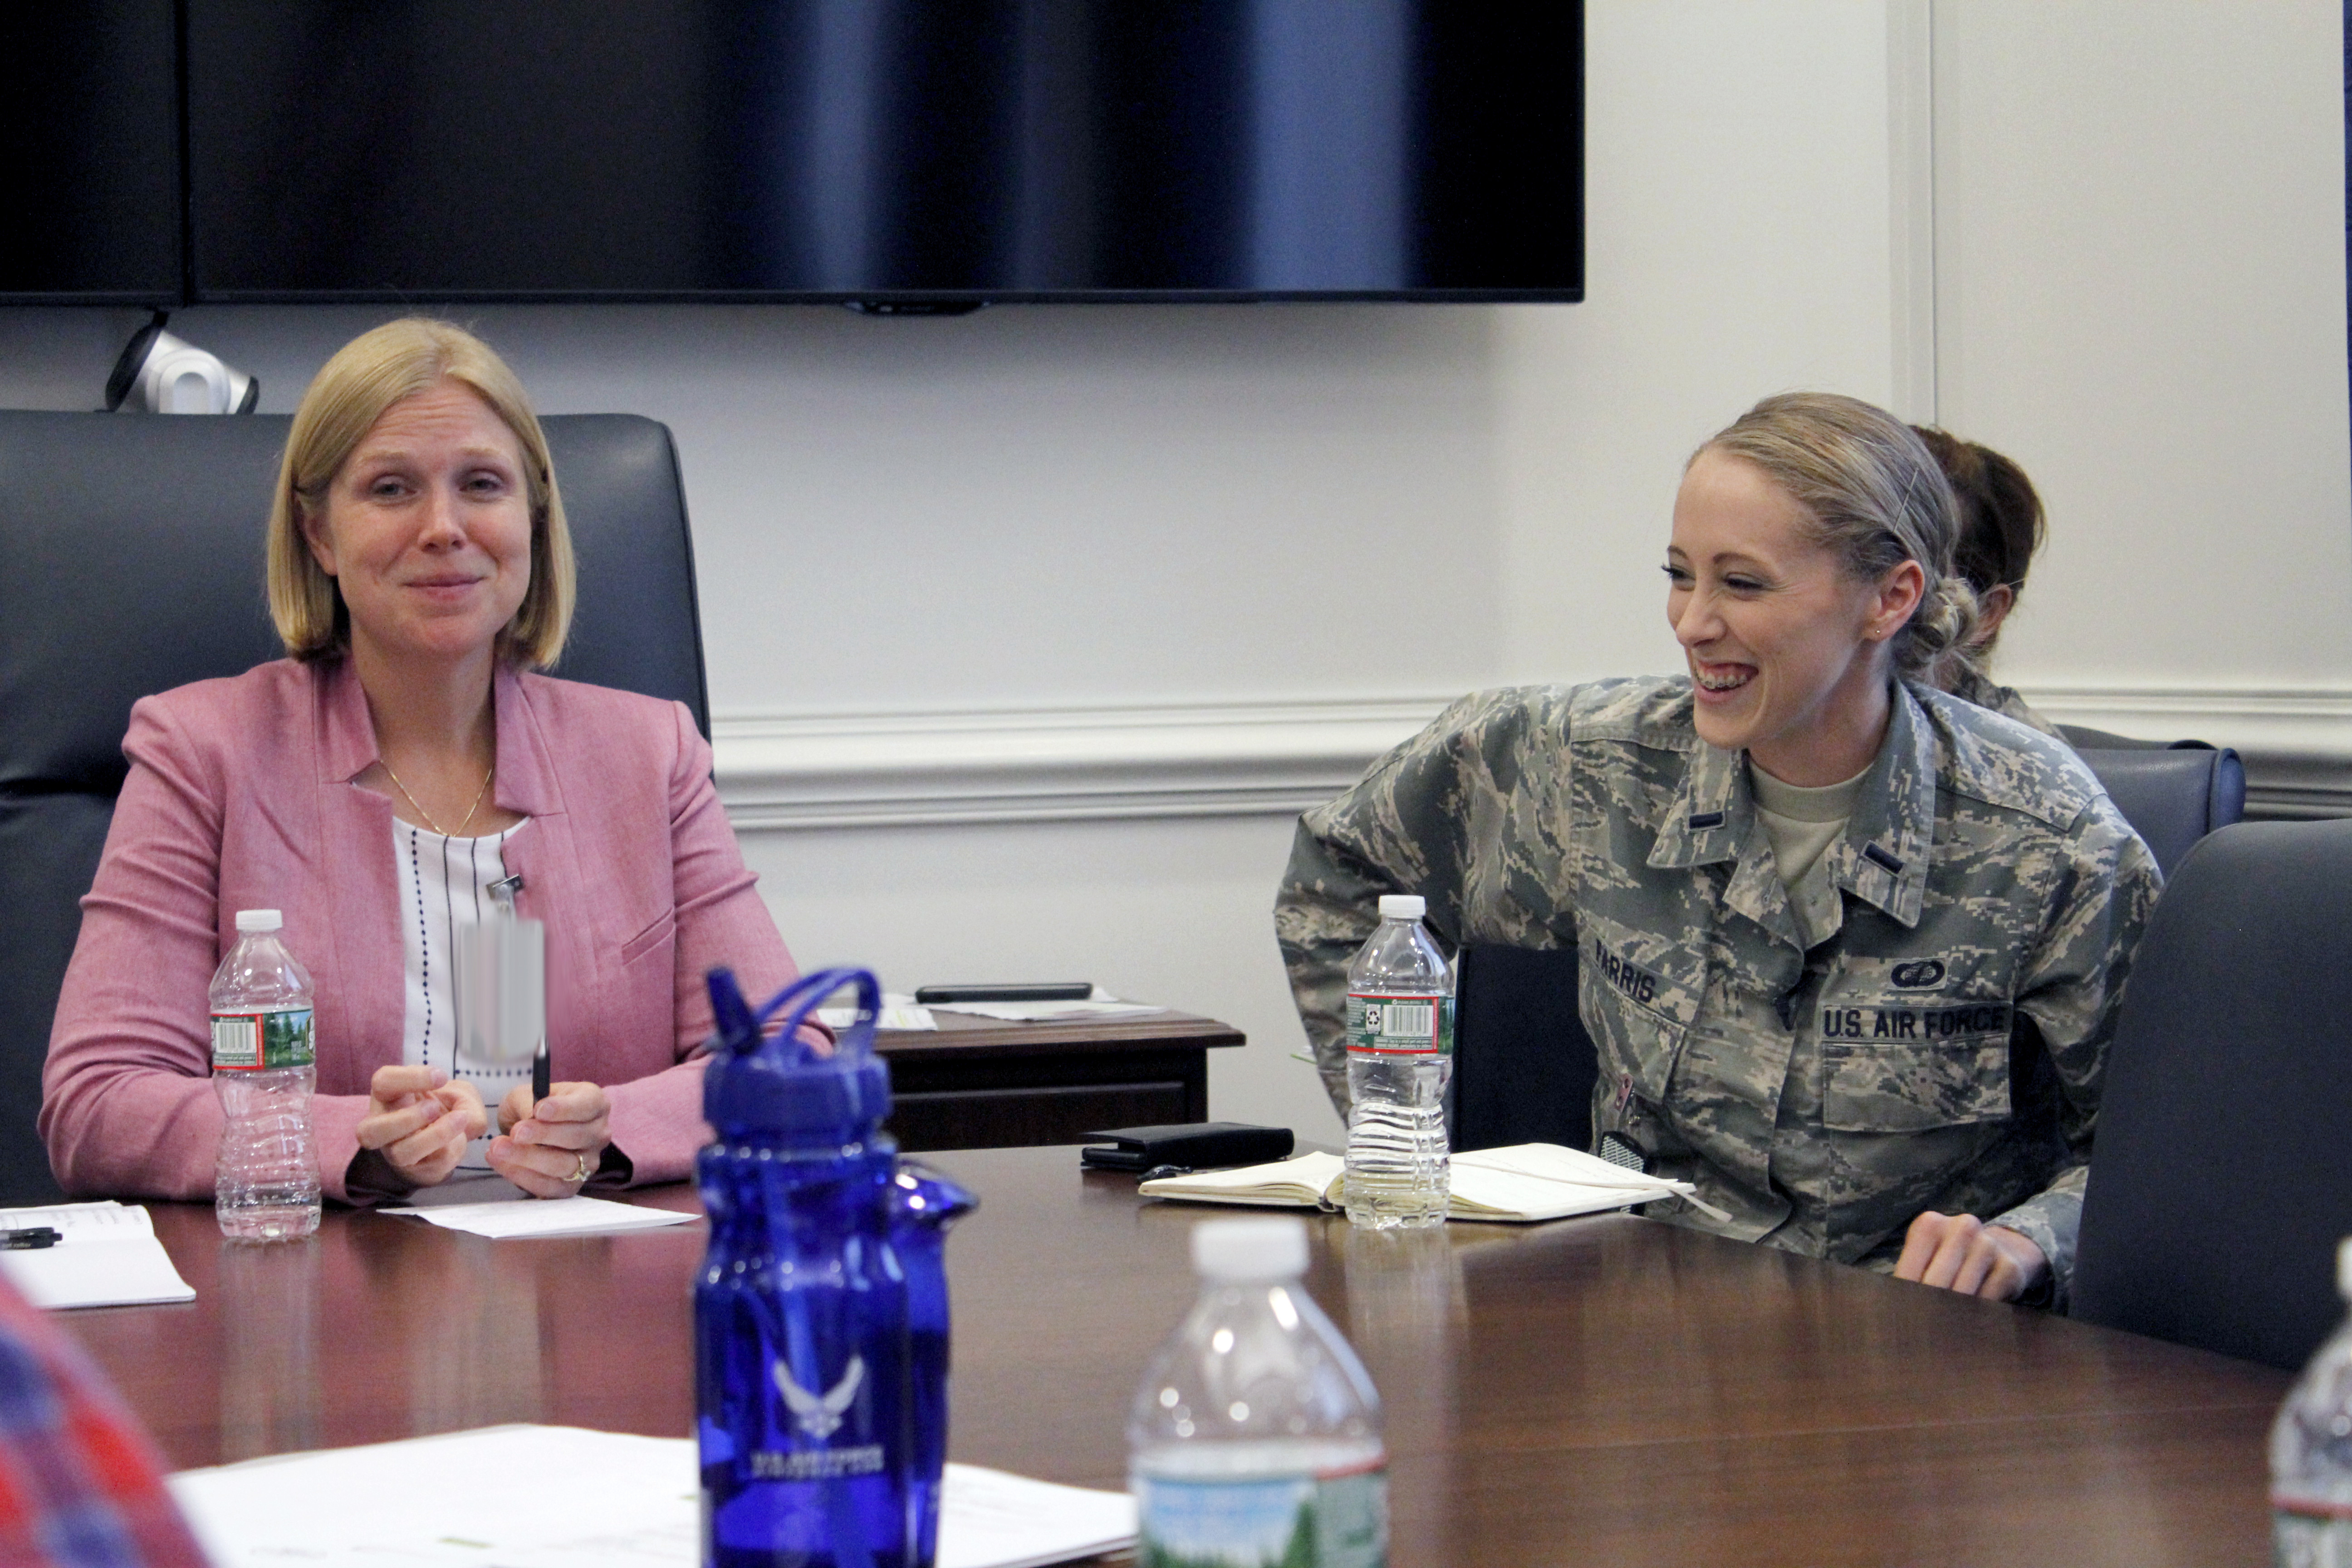 (From left to right) Lauren Knausenberger, director of Cyberspace Innovation, and 1st Lt. Jessica Farris, program manager and engineer, Lifecycle Management Center, Agile Combat Systems Directorate, participate in a women in technology panel during the Air Force Conference, also known as AFCON, at the Pentagon, July 19. AFCON is a one-day immersion into Air Force technology, culture and operations designed for long-form storytellers who typically do not cover the military.